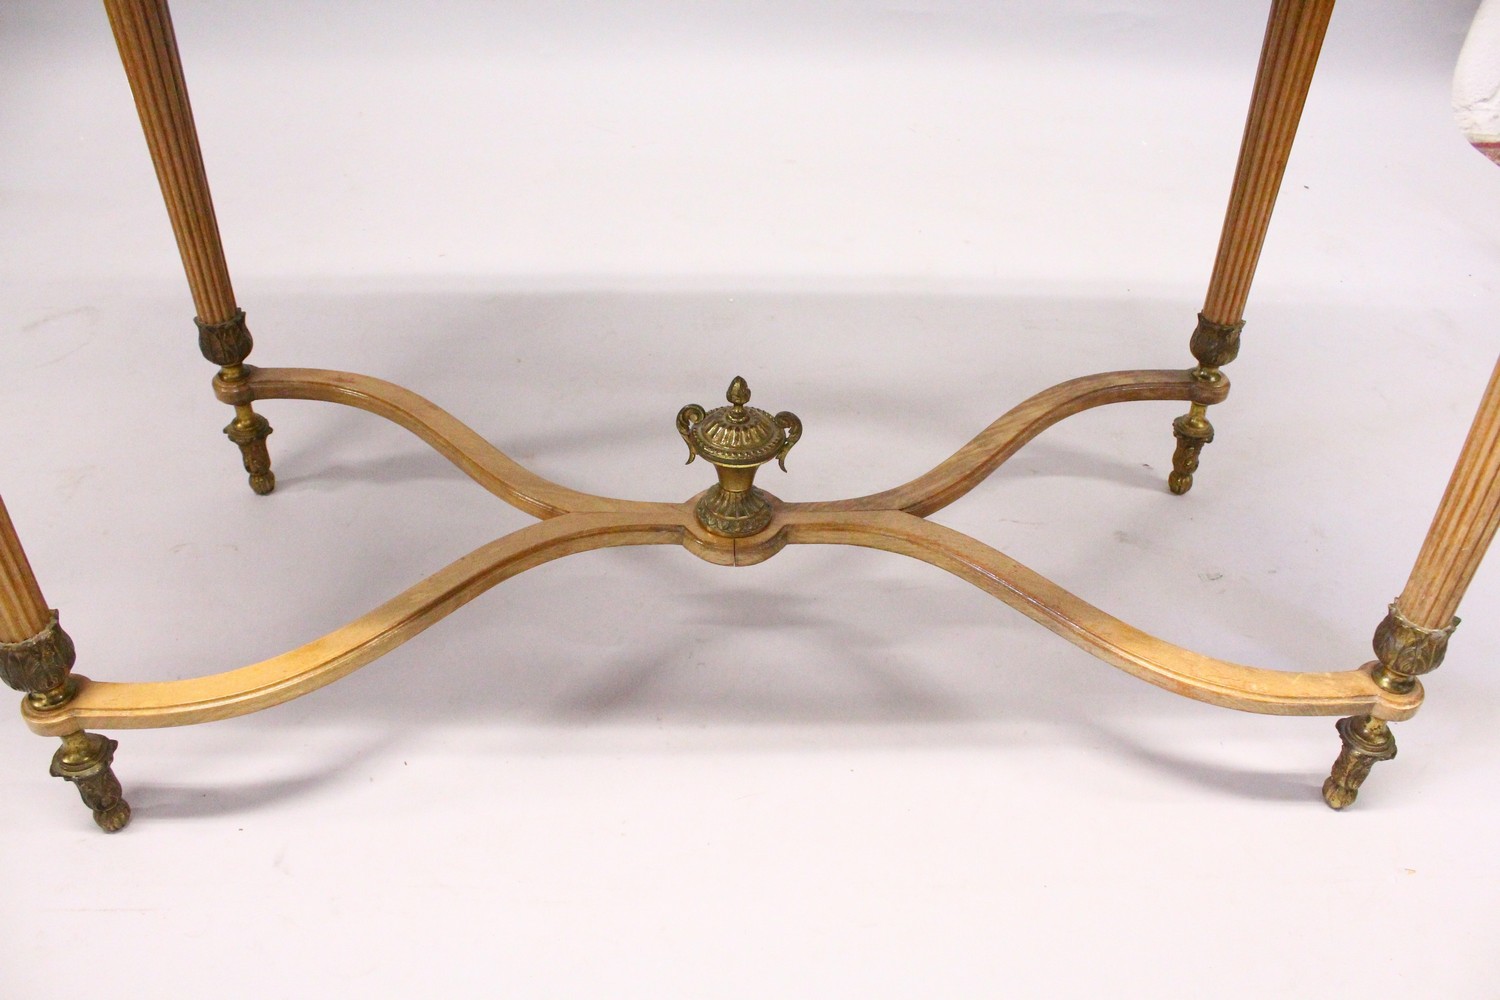 A FRENCH MAHOGANY, KINGWOOD AND ORMOLU BONHEUR DU JOUR, 20TH CENTURY, with galleried upper section - Image 3 of 10